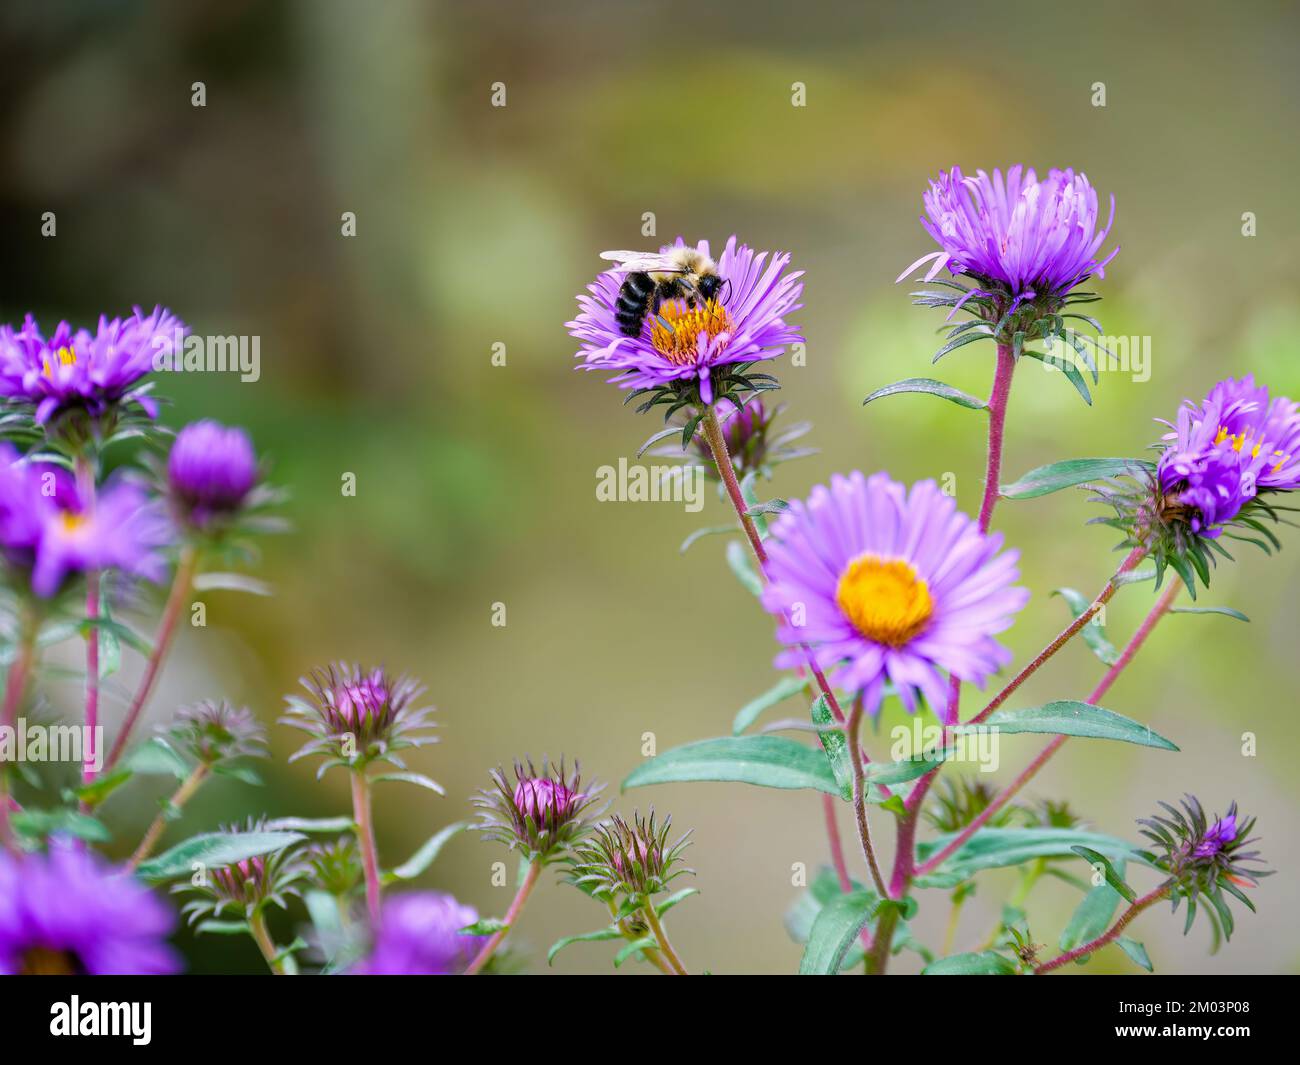 Bumble bee on New England aster flower. Stock Photo